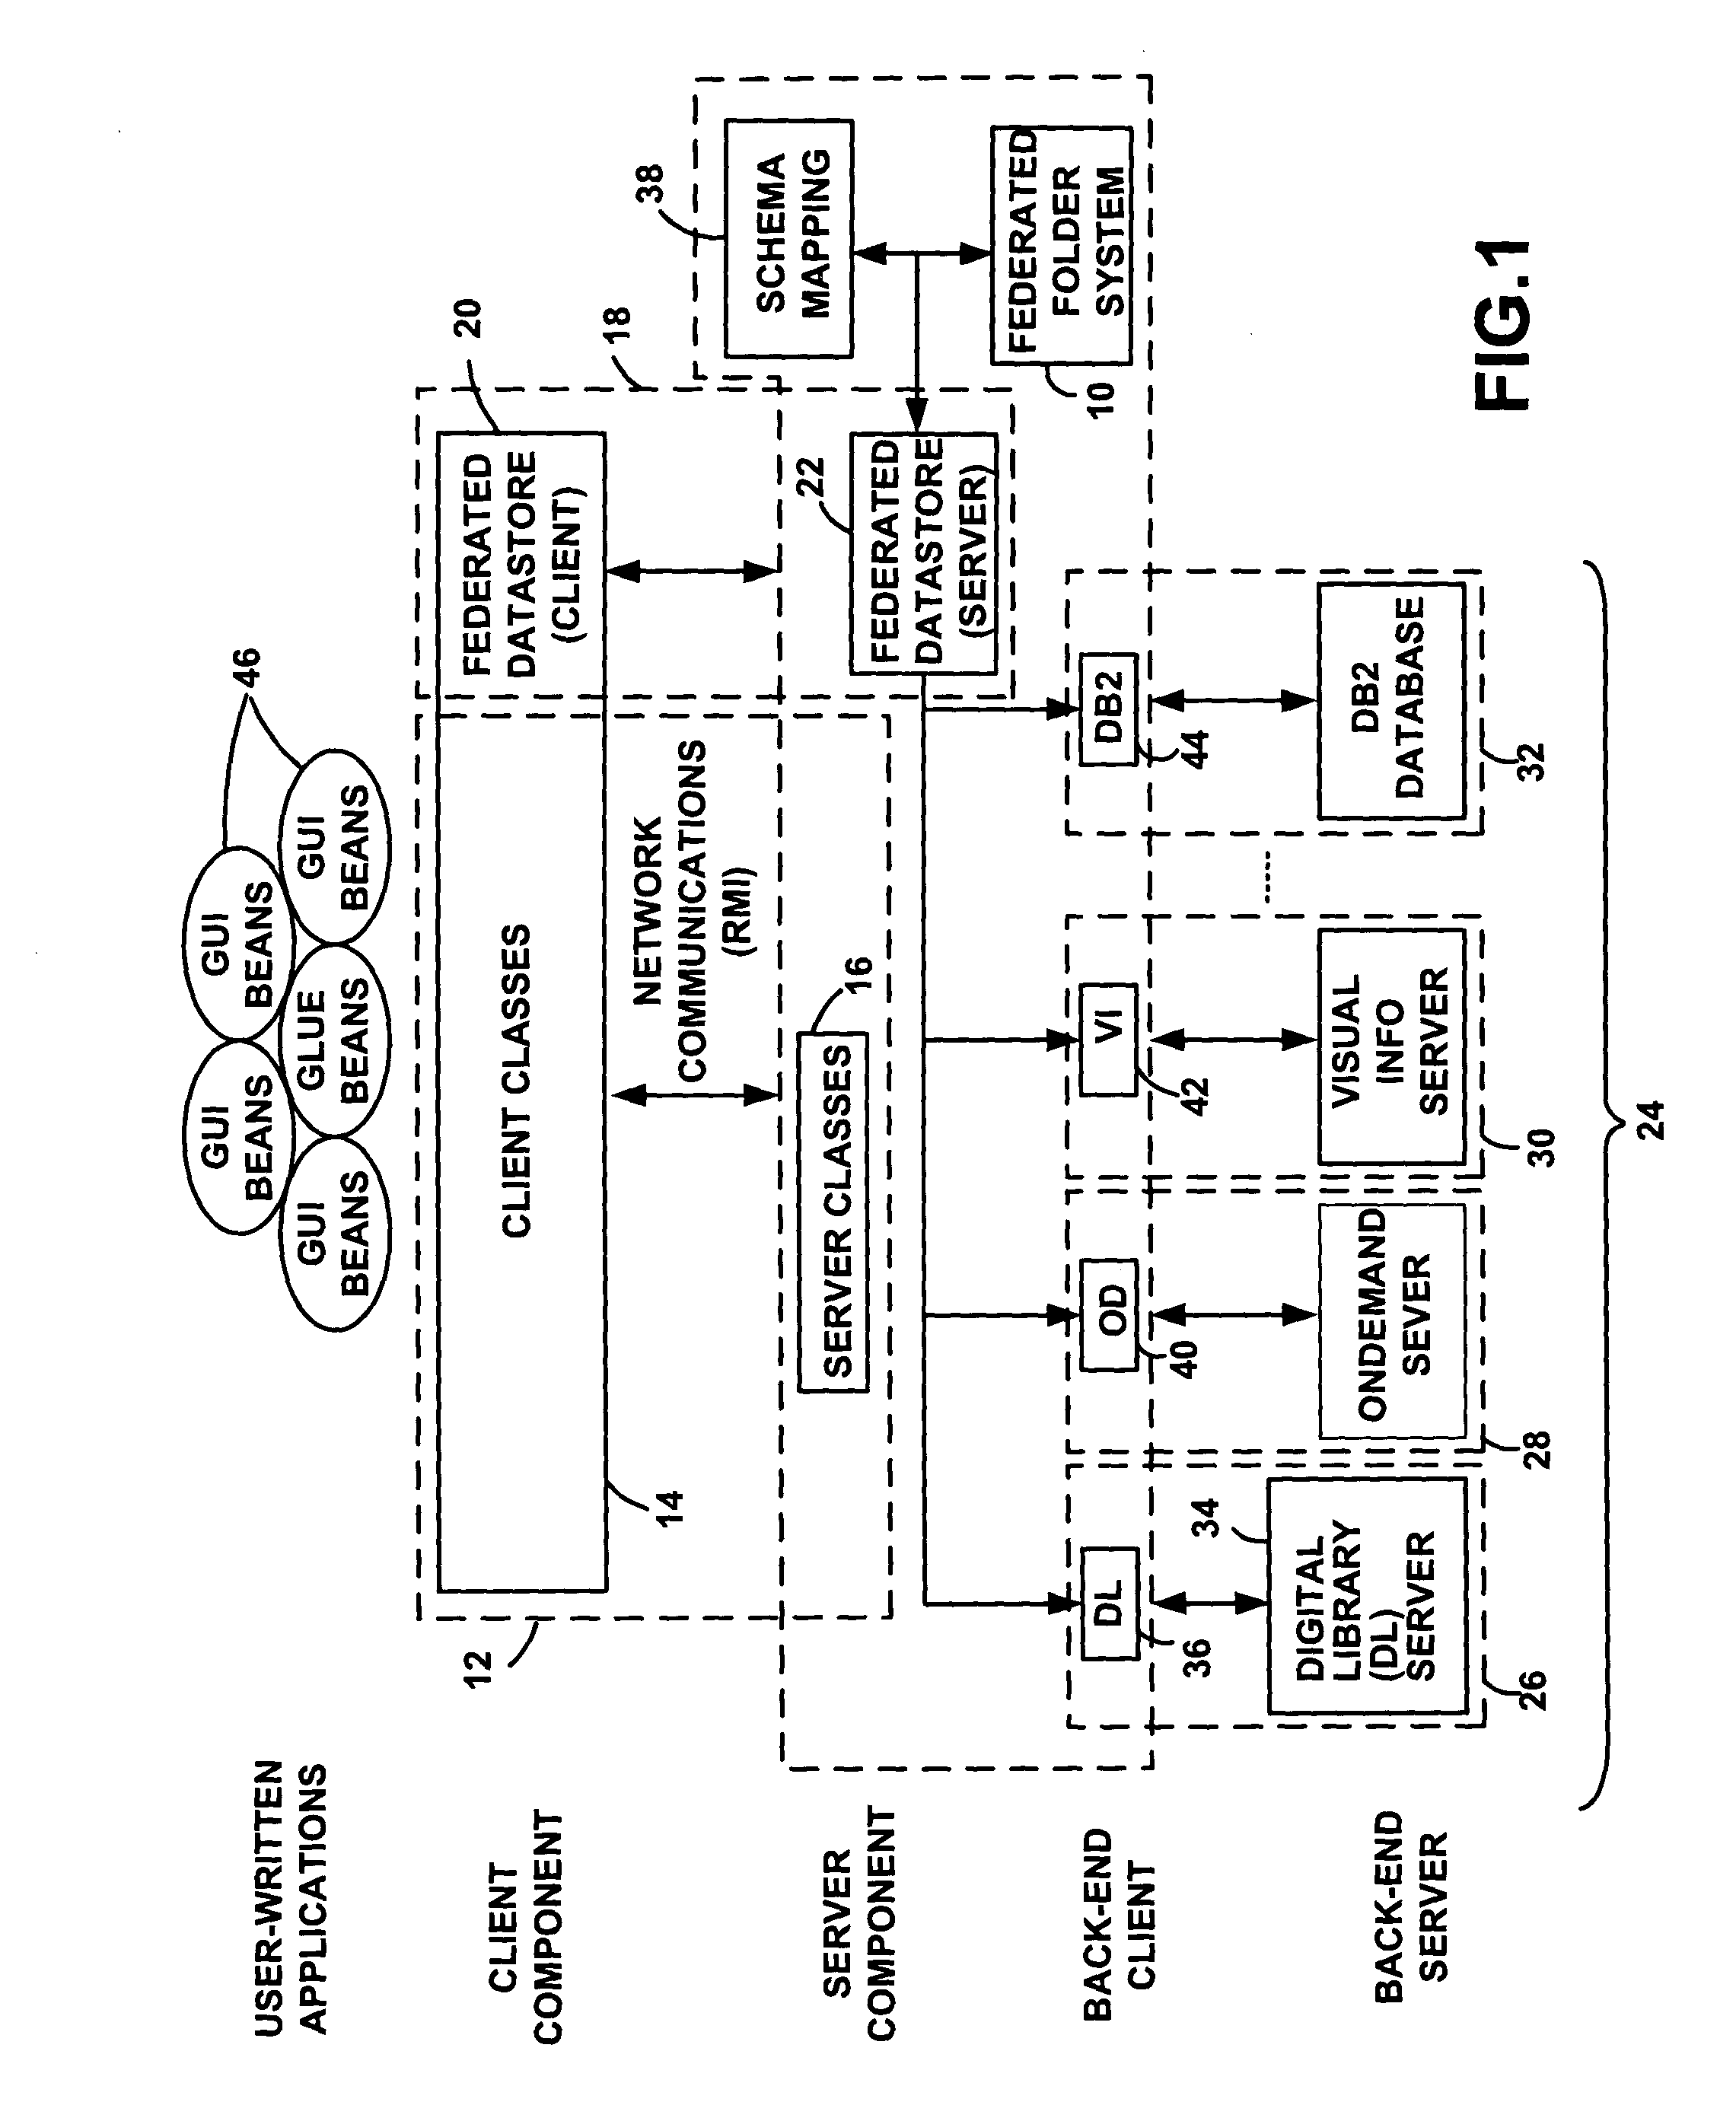 System, method, and service for managing persistent federated folders within a federated content management system